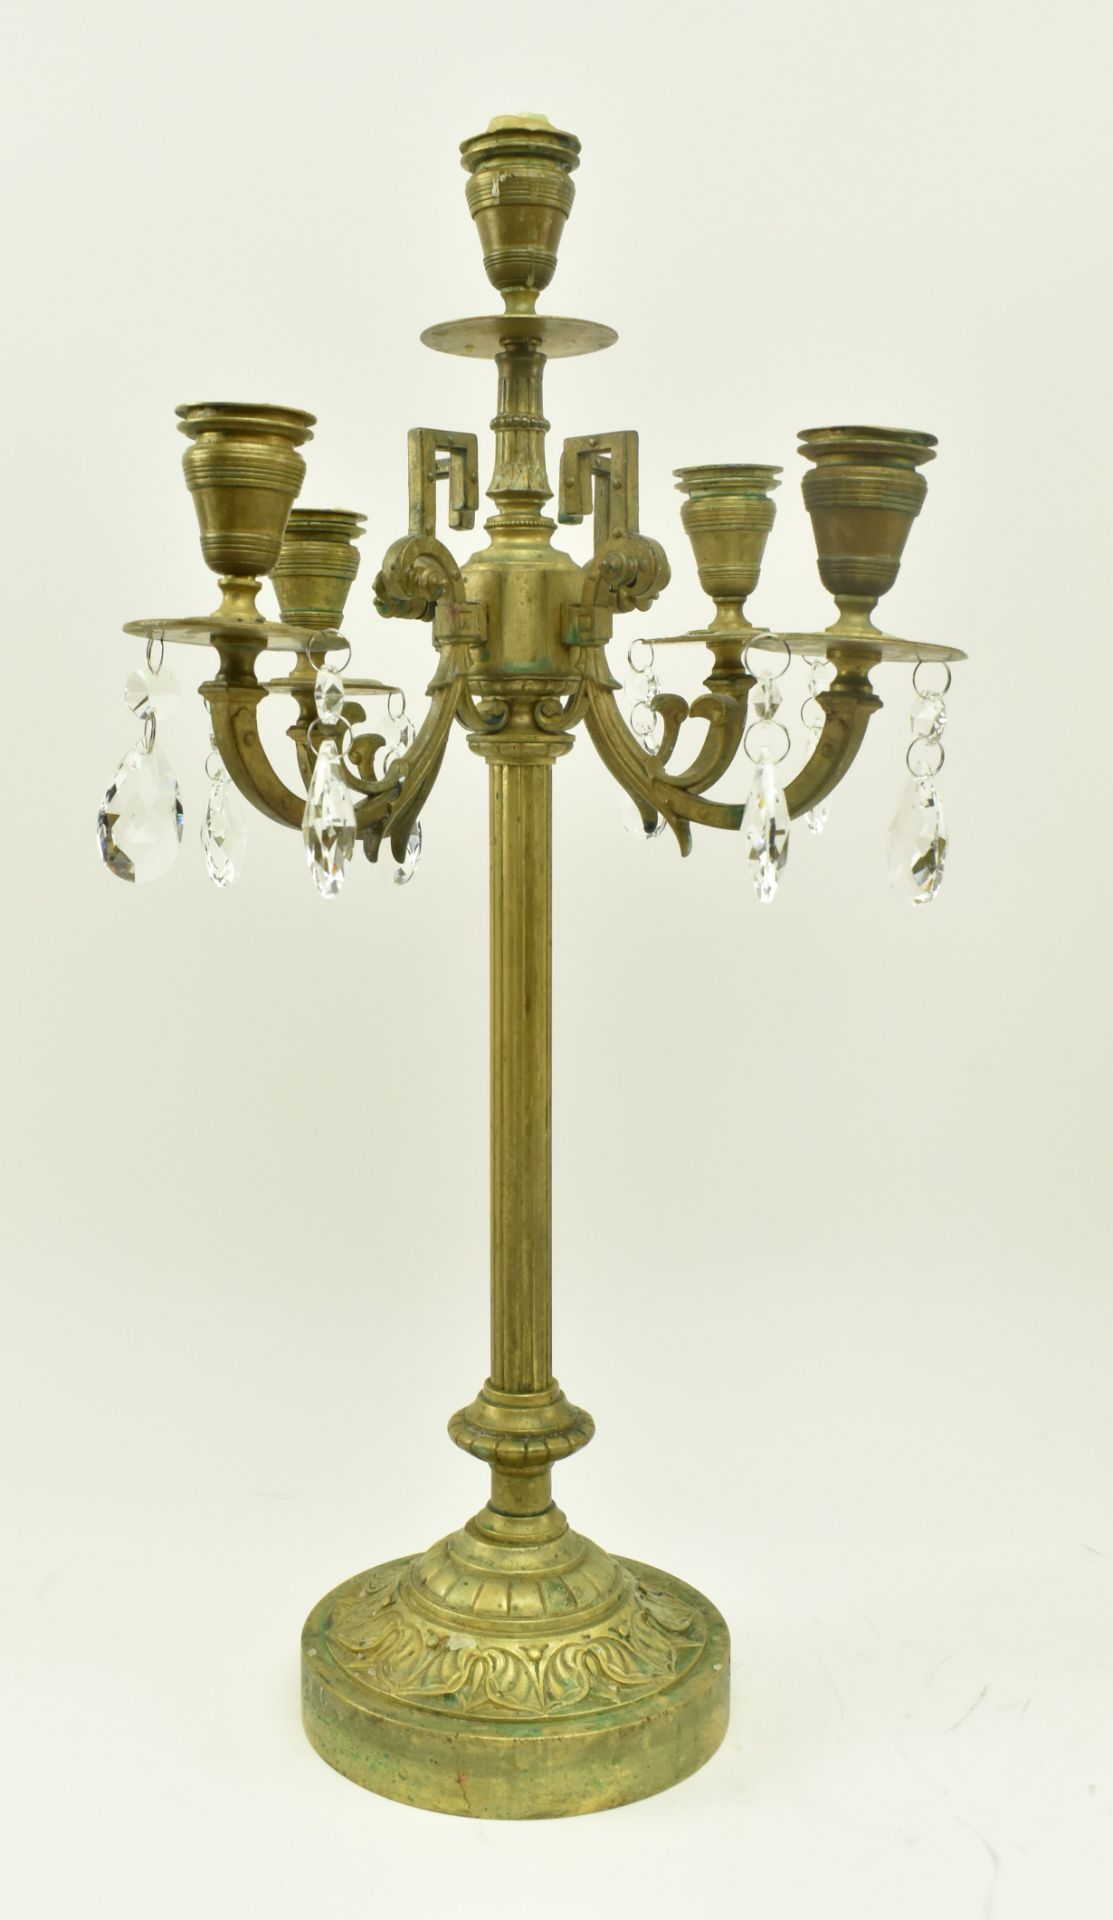 PAIR OF FRENCH INSPIRED BRASS DESK TABLE CANDELABRAS - Image 2 of 6